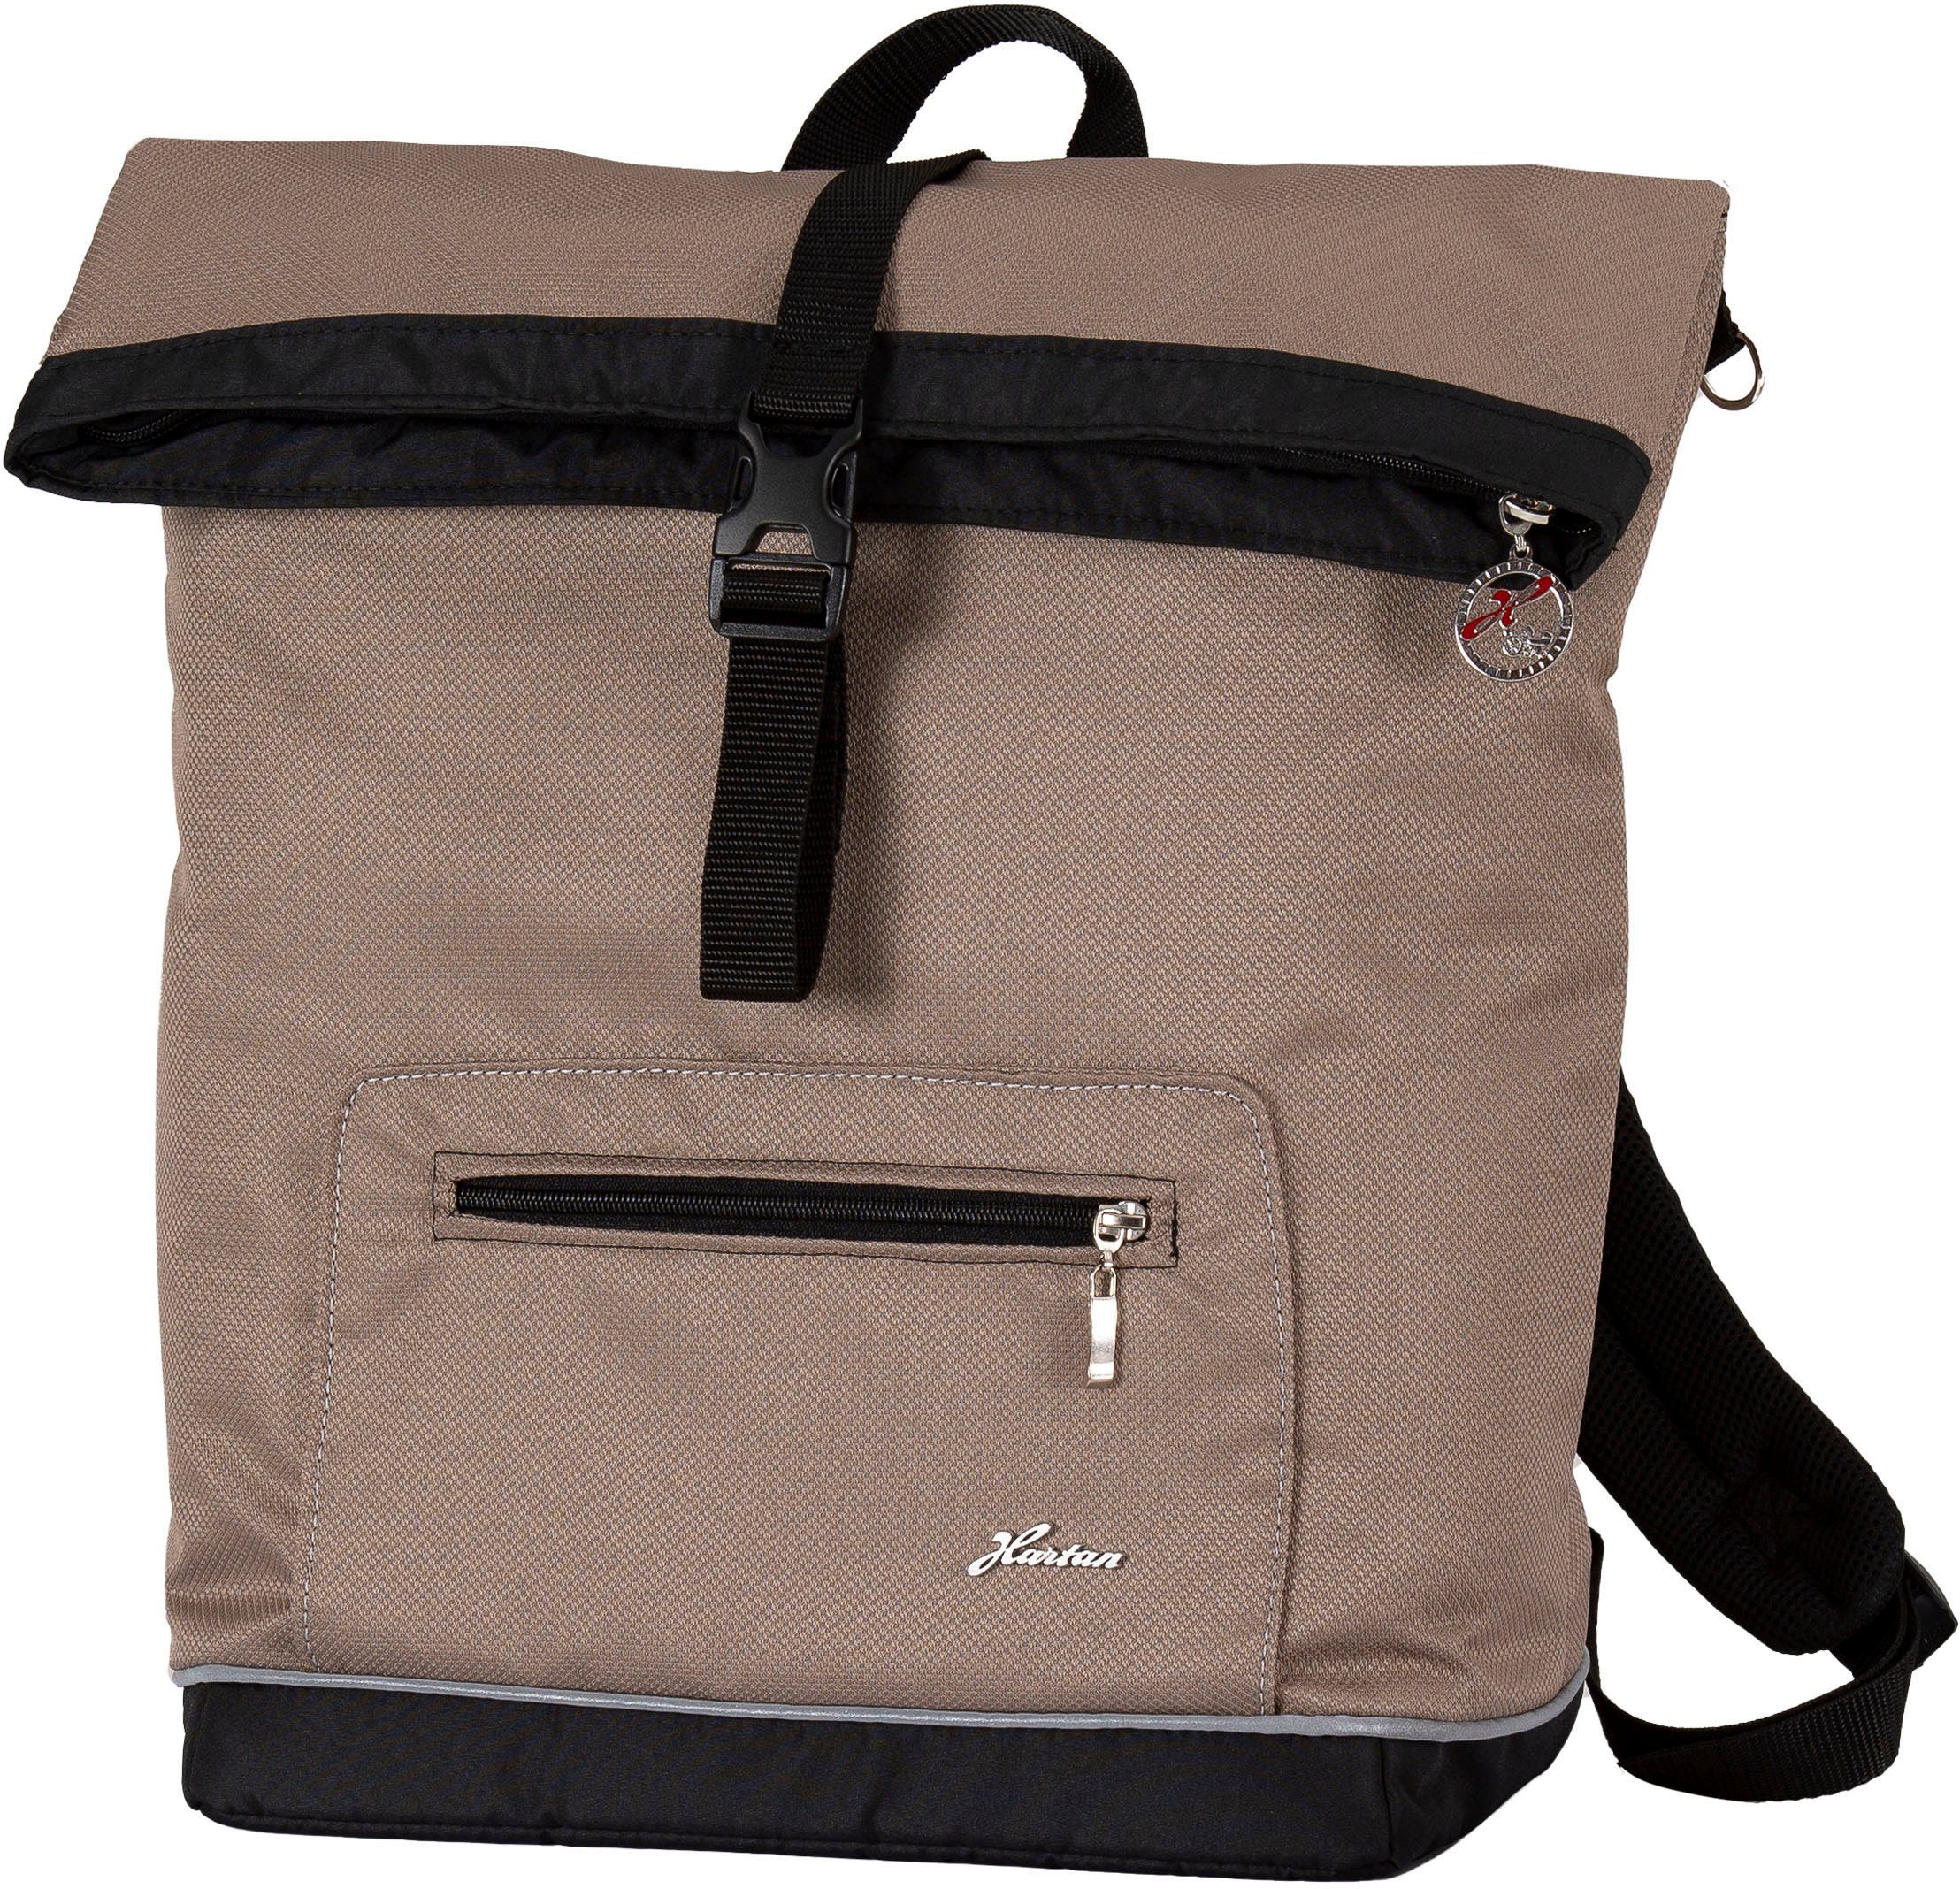 Hartan Wickelrucksack Space bag - Casual Collection, mit Thermofach; Made in Germany happy feet